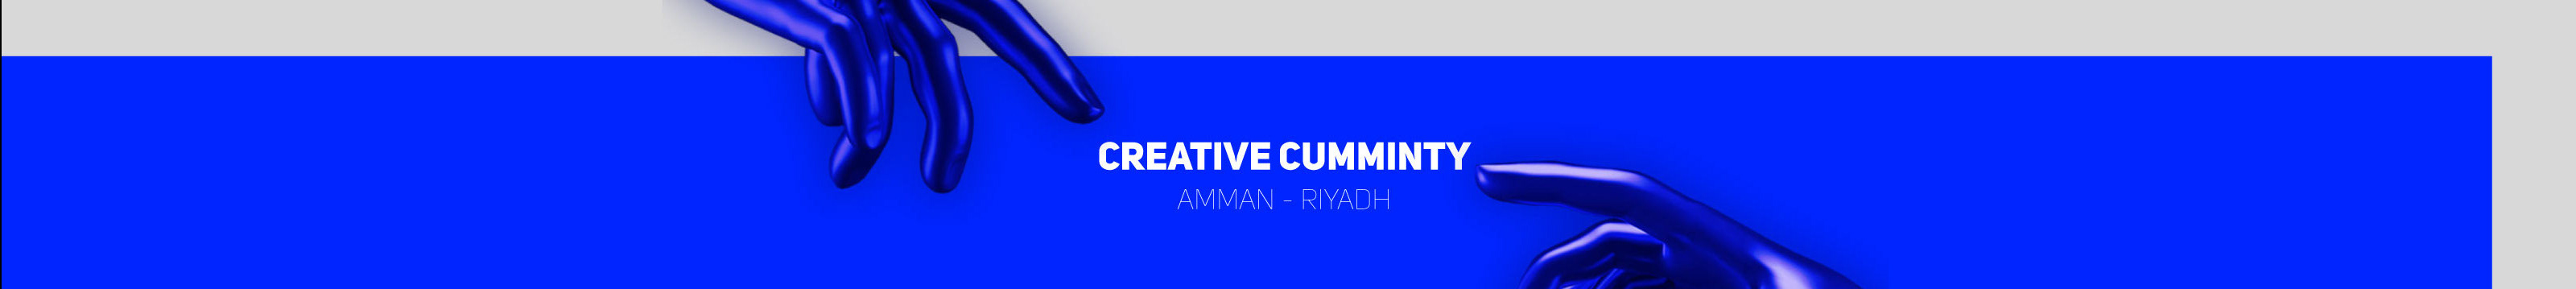 The Office Creative Community's profile banner